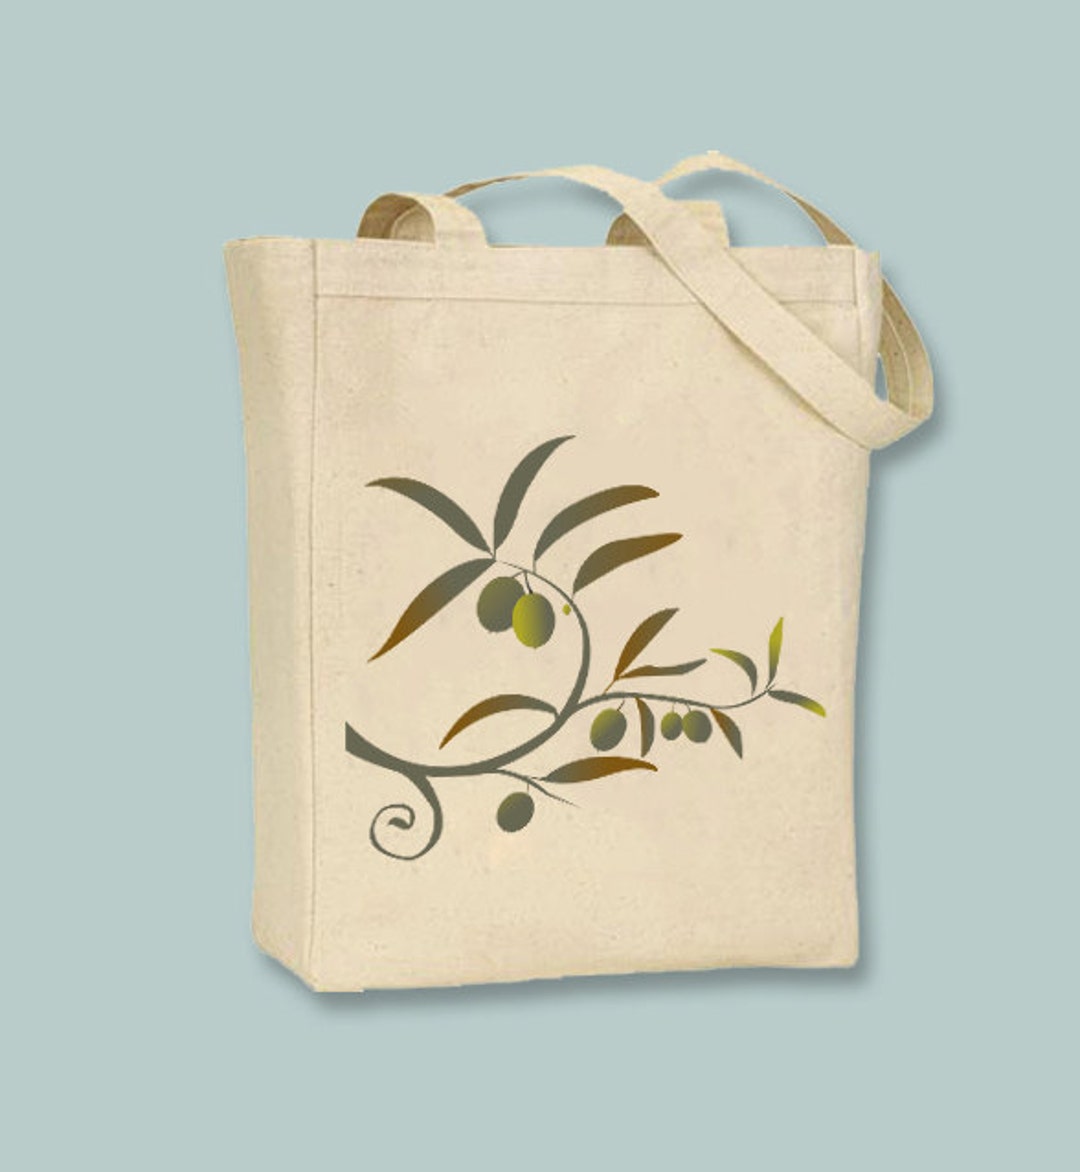 Beautiful Greek Olive Branch Image Canvas Tote Bag - Etsy